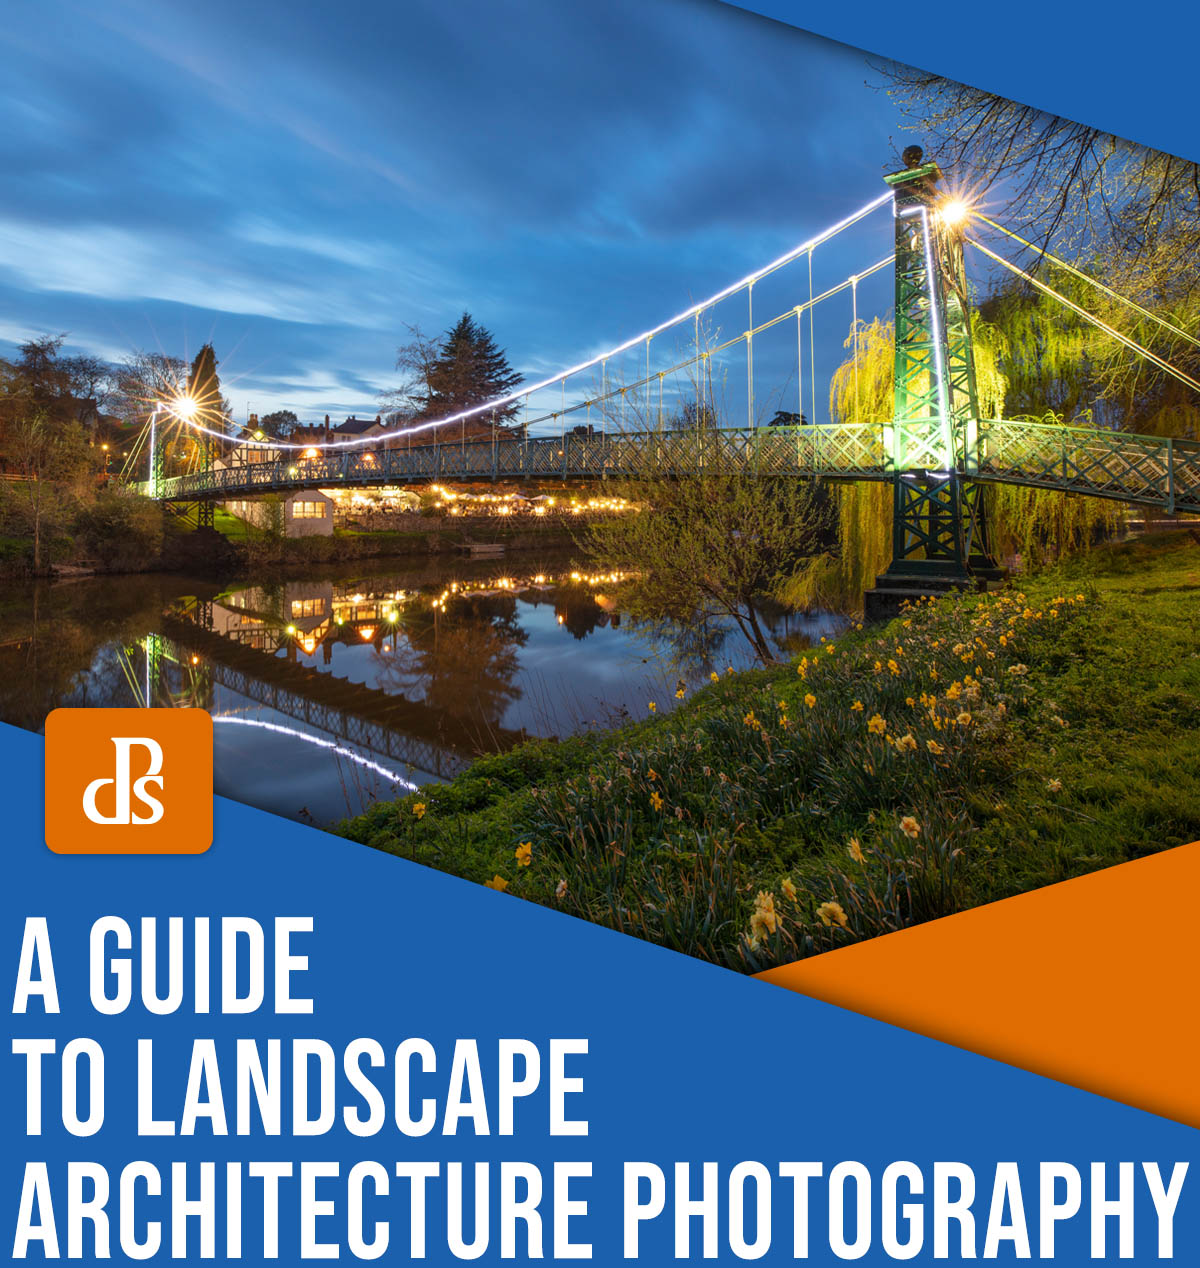 A guide to landscape architecture photography